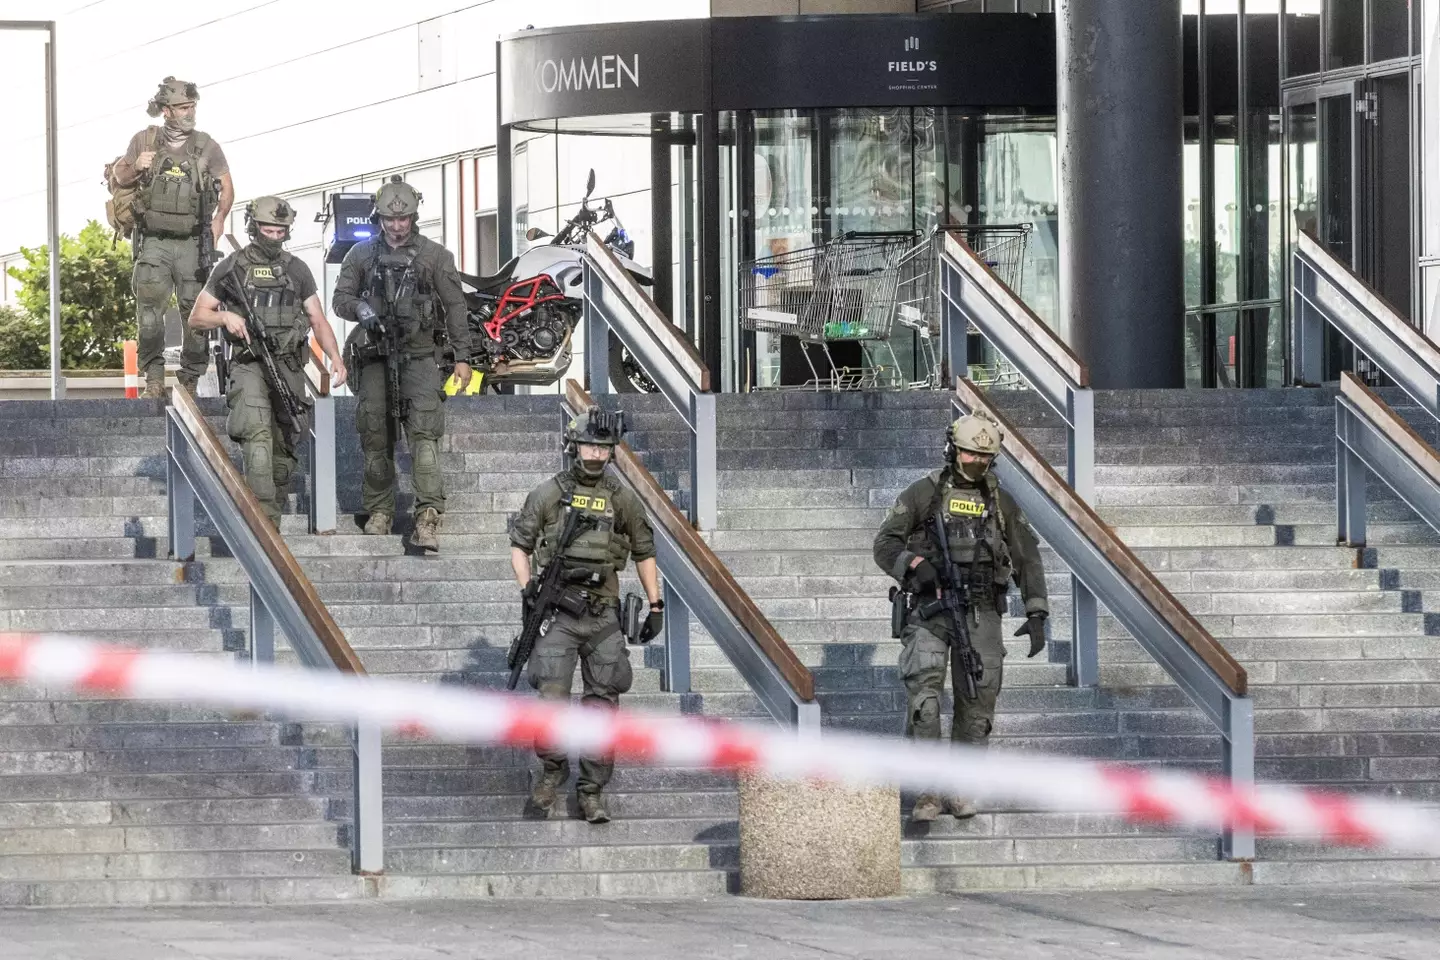 Danish police were able to arrest the suspected shooter near the mall 13 minutes after being alerted.